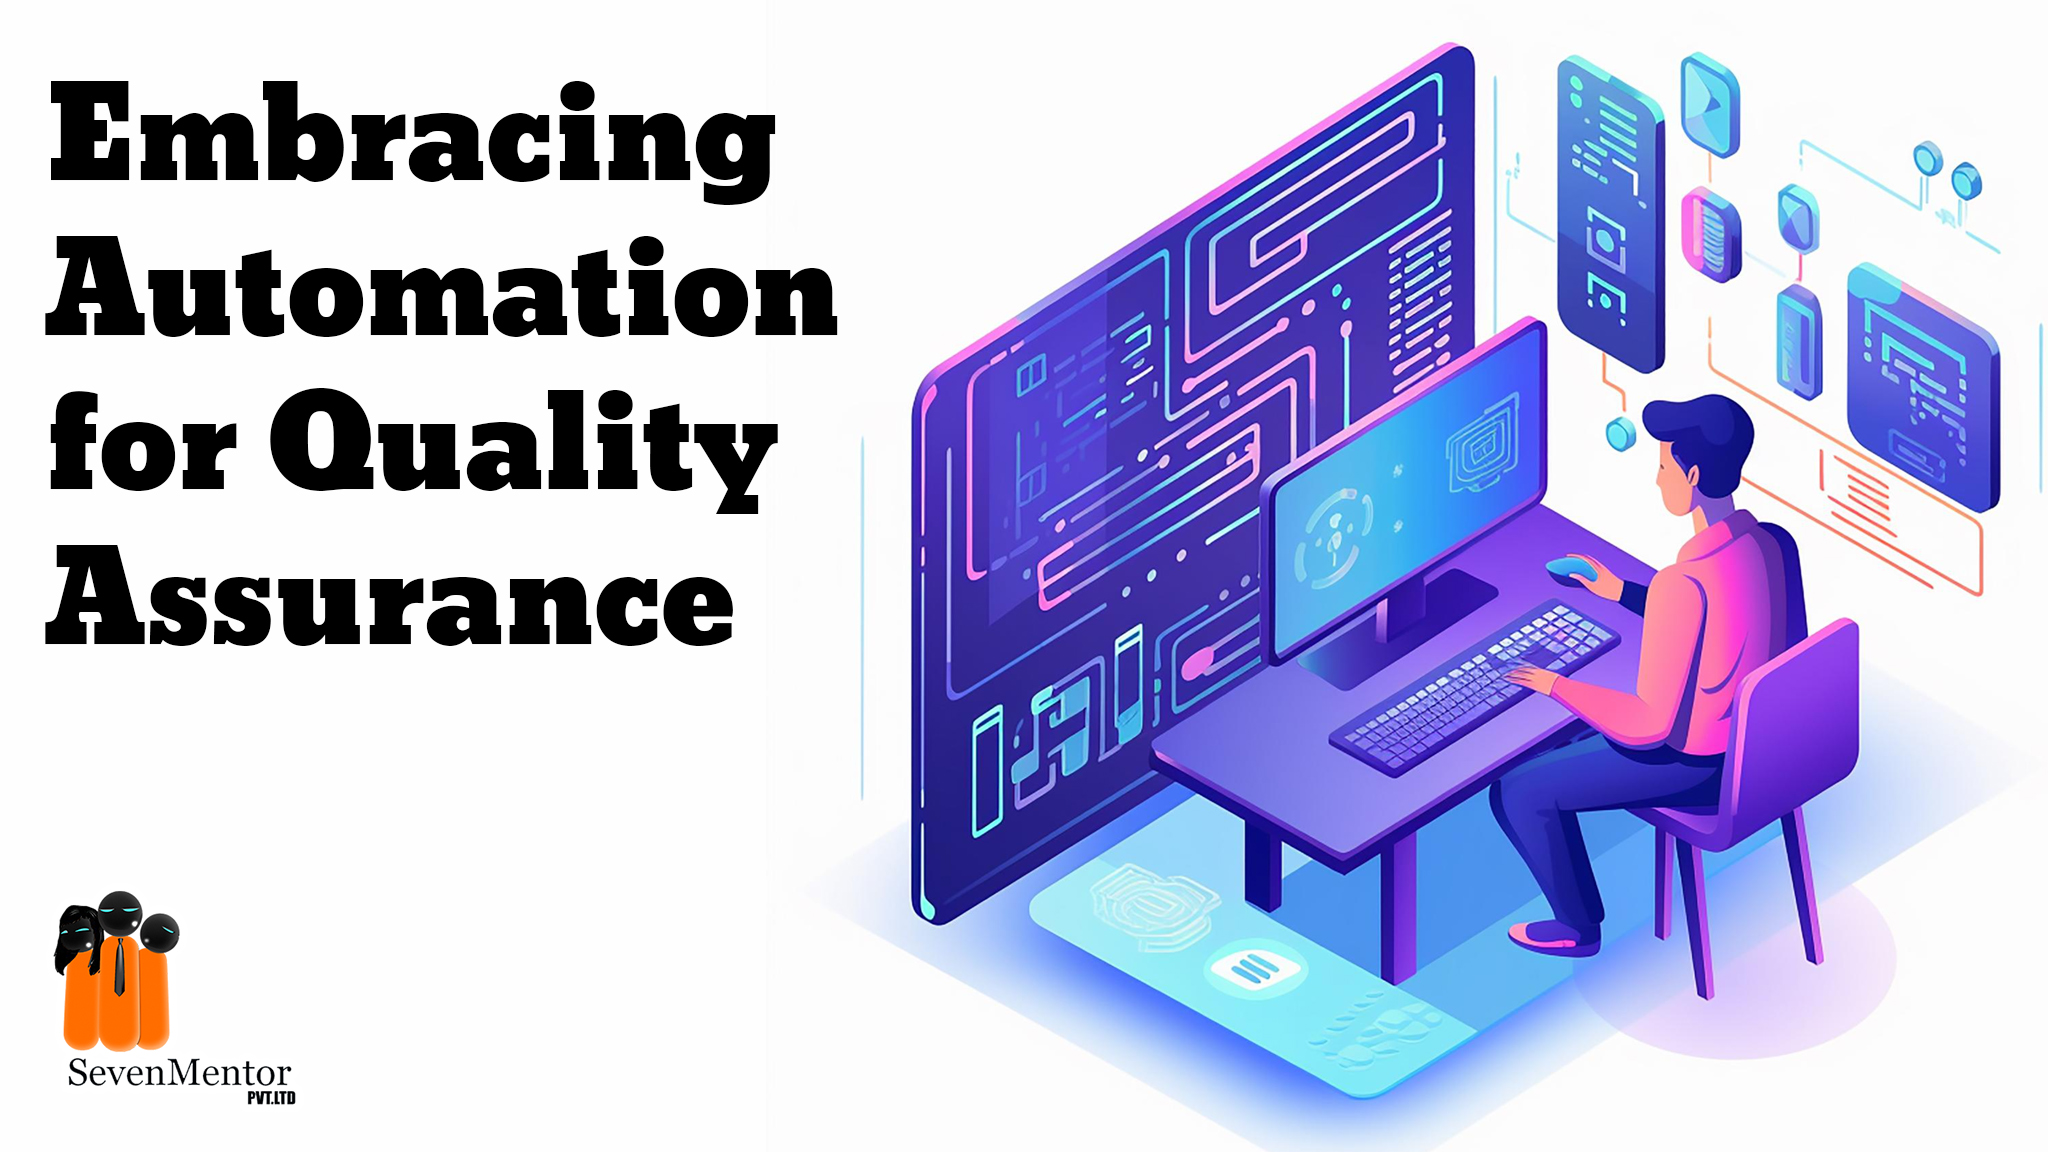 Embracing Automation for Quality Assurance